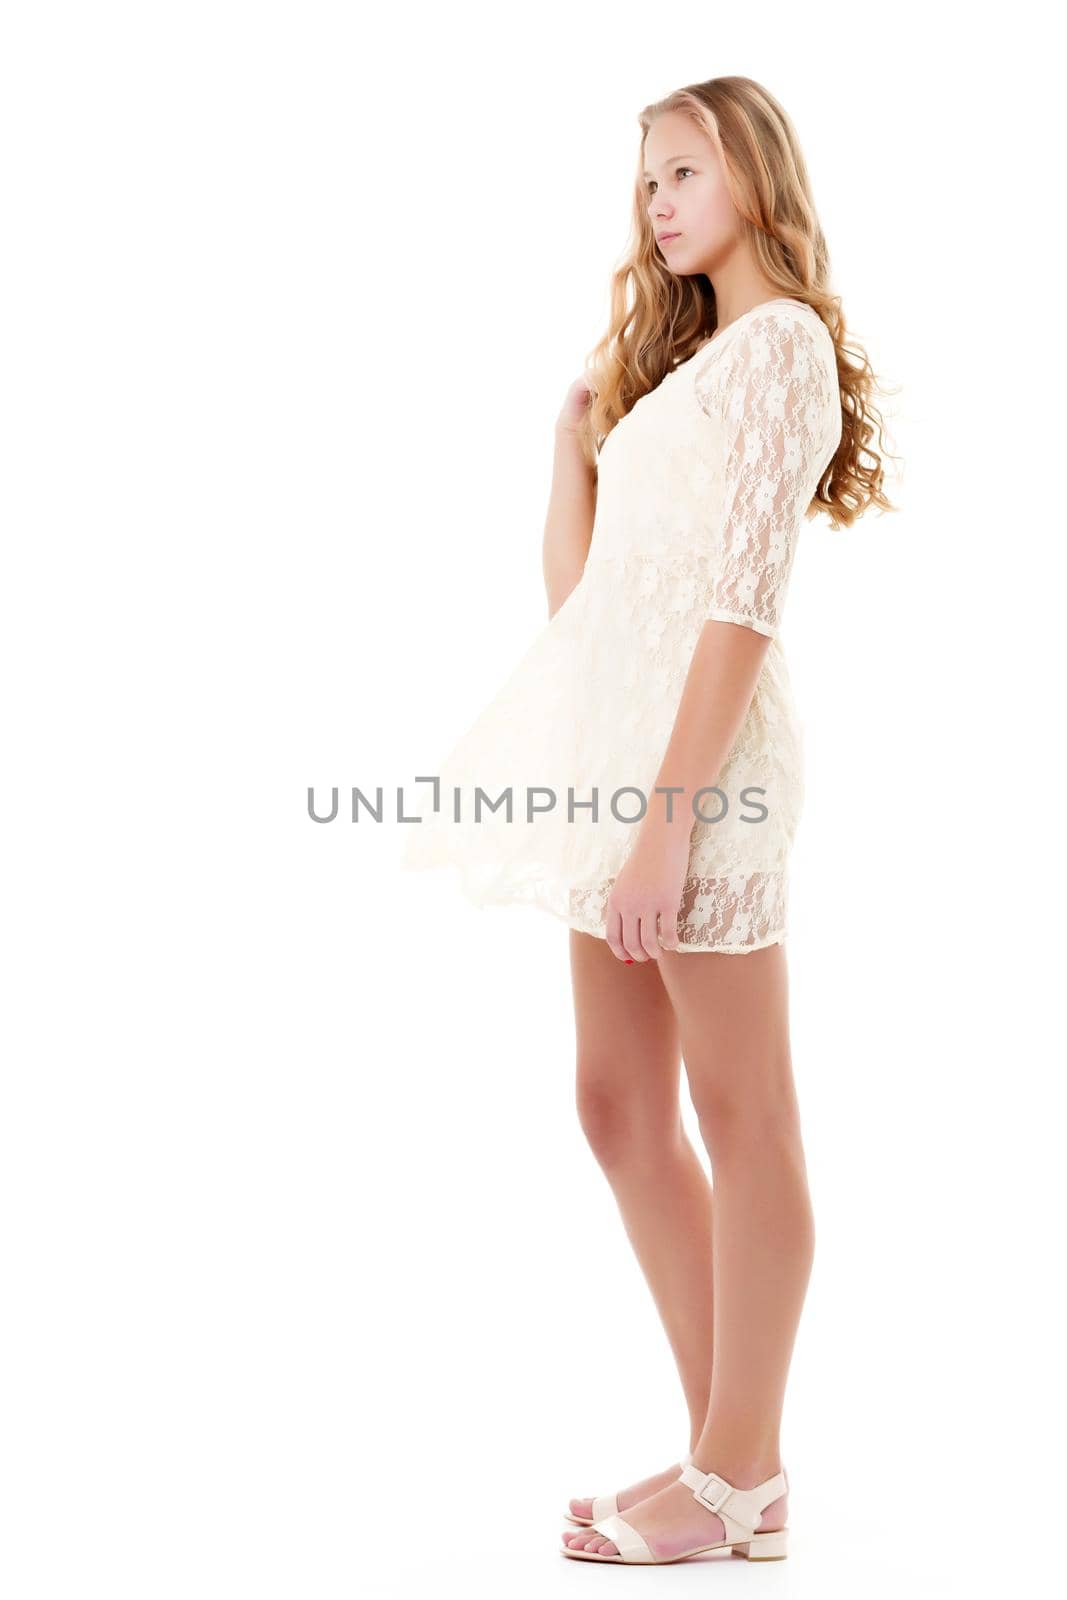 Portrait of a positive and stylish little girl in a summer dress, rejoices in the wind that blows and moves her dress and hair. The concept of beauty and fashion. Isolated on white background.